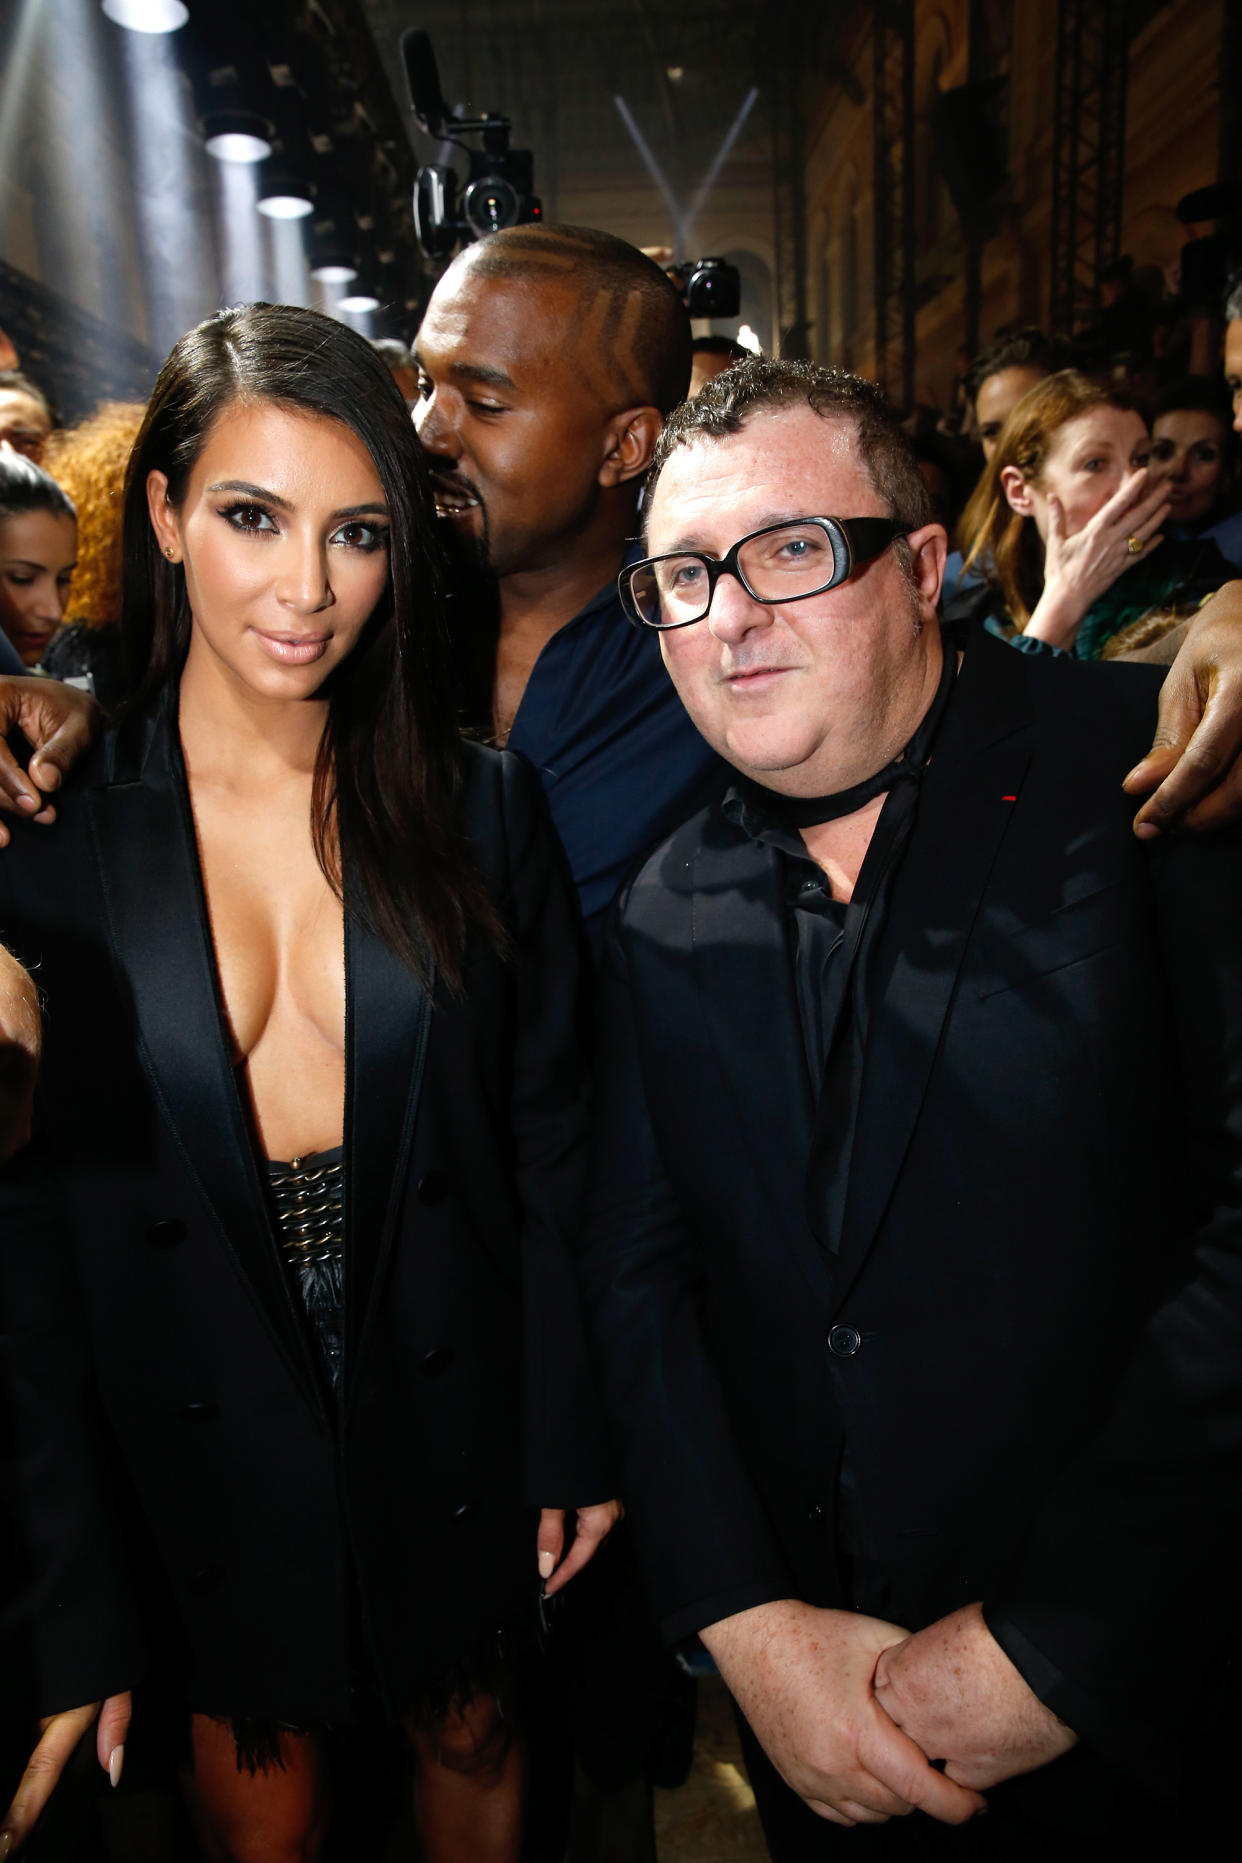 Kim Kardashian, Kanye West and Alber Elbaz depicted in Paris, France during a 2014 Lanvin fashion show. (Photo: Rindoff/Dufour/French Select/Getty Images)